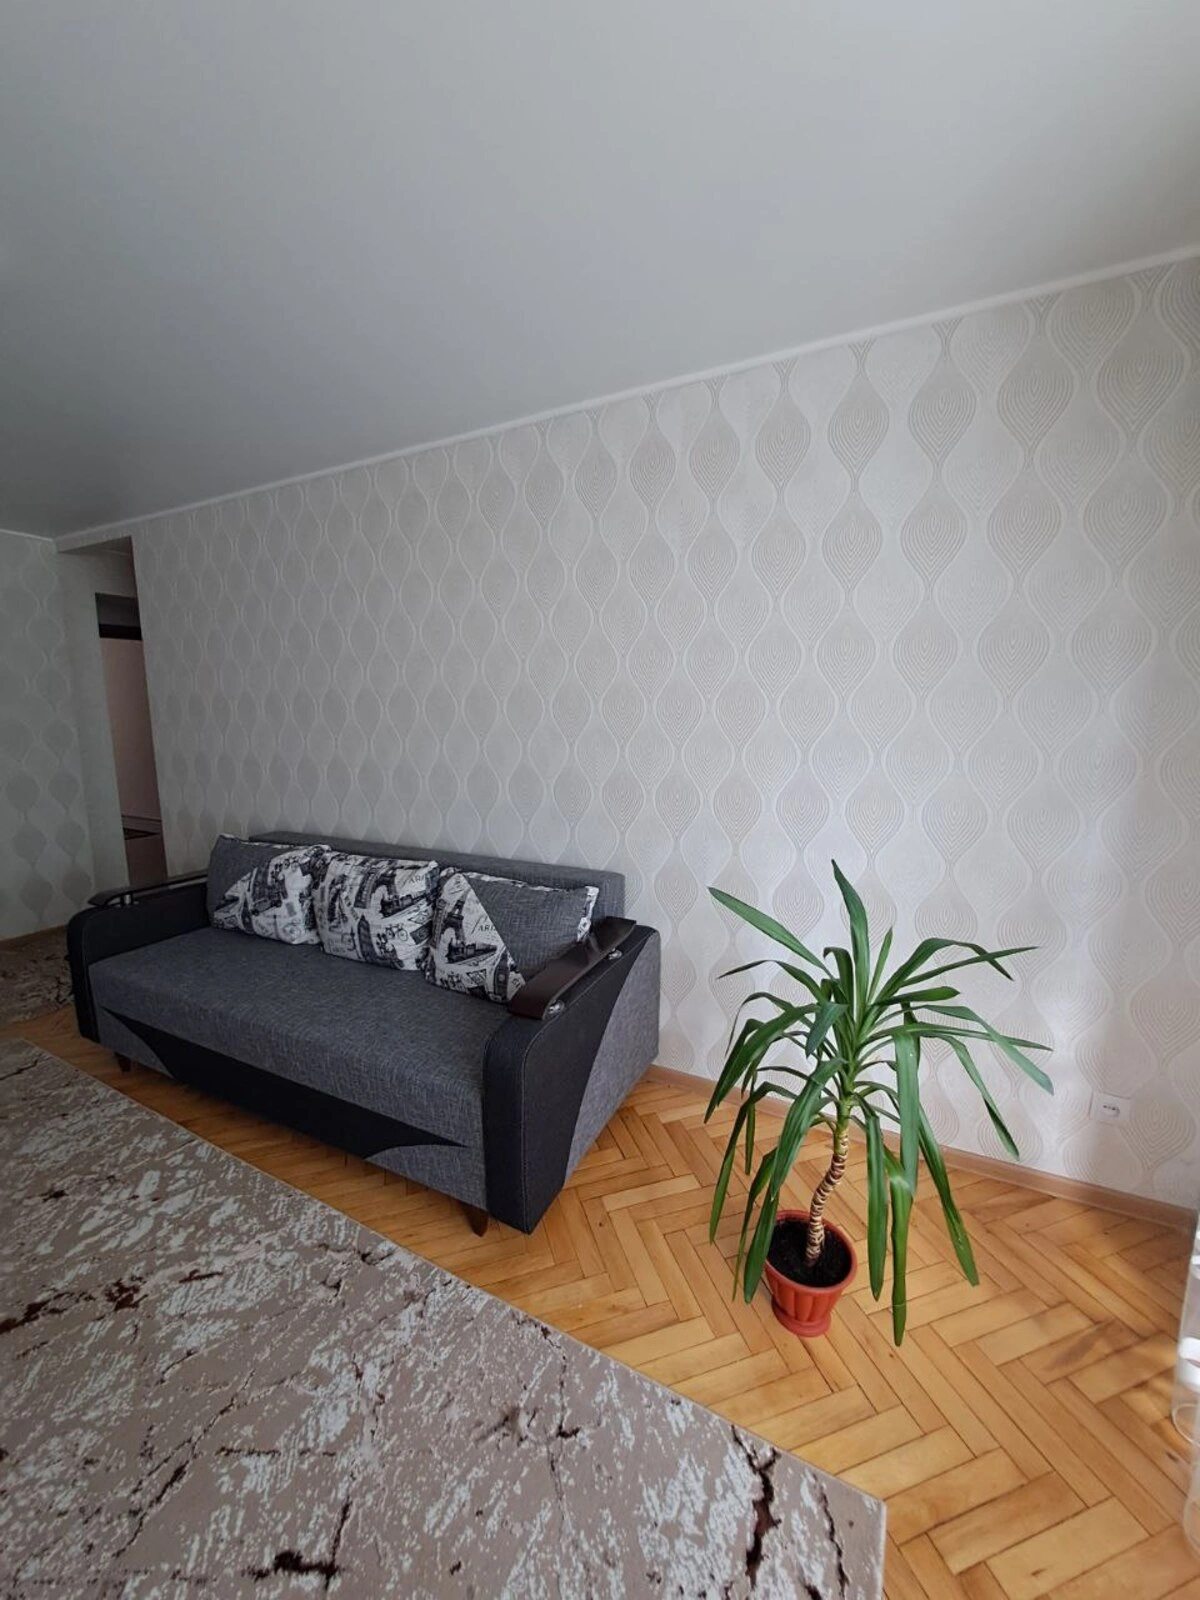 Apartments for sale. 3 rooms, 59 m², 2nd floor/4 floors. Tsentr, Ternopil. 